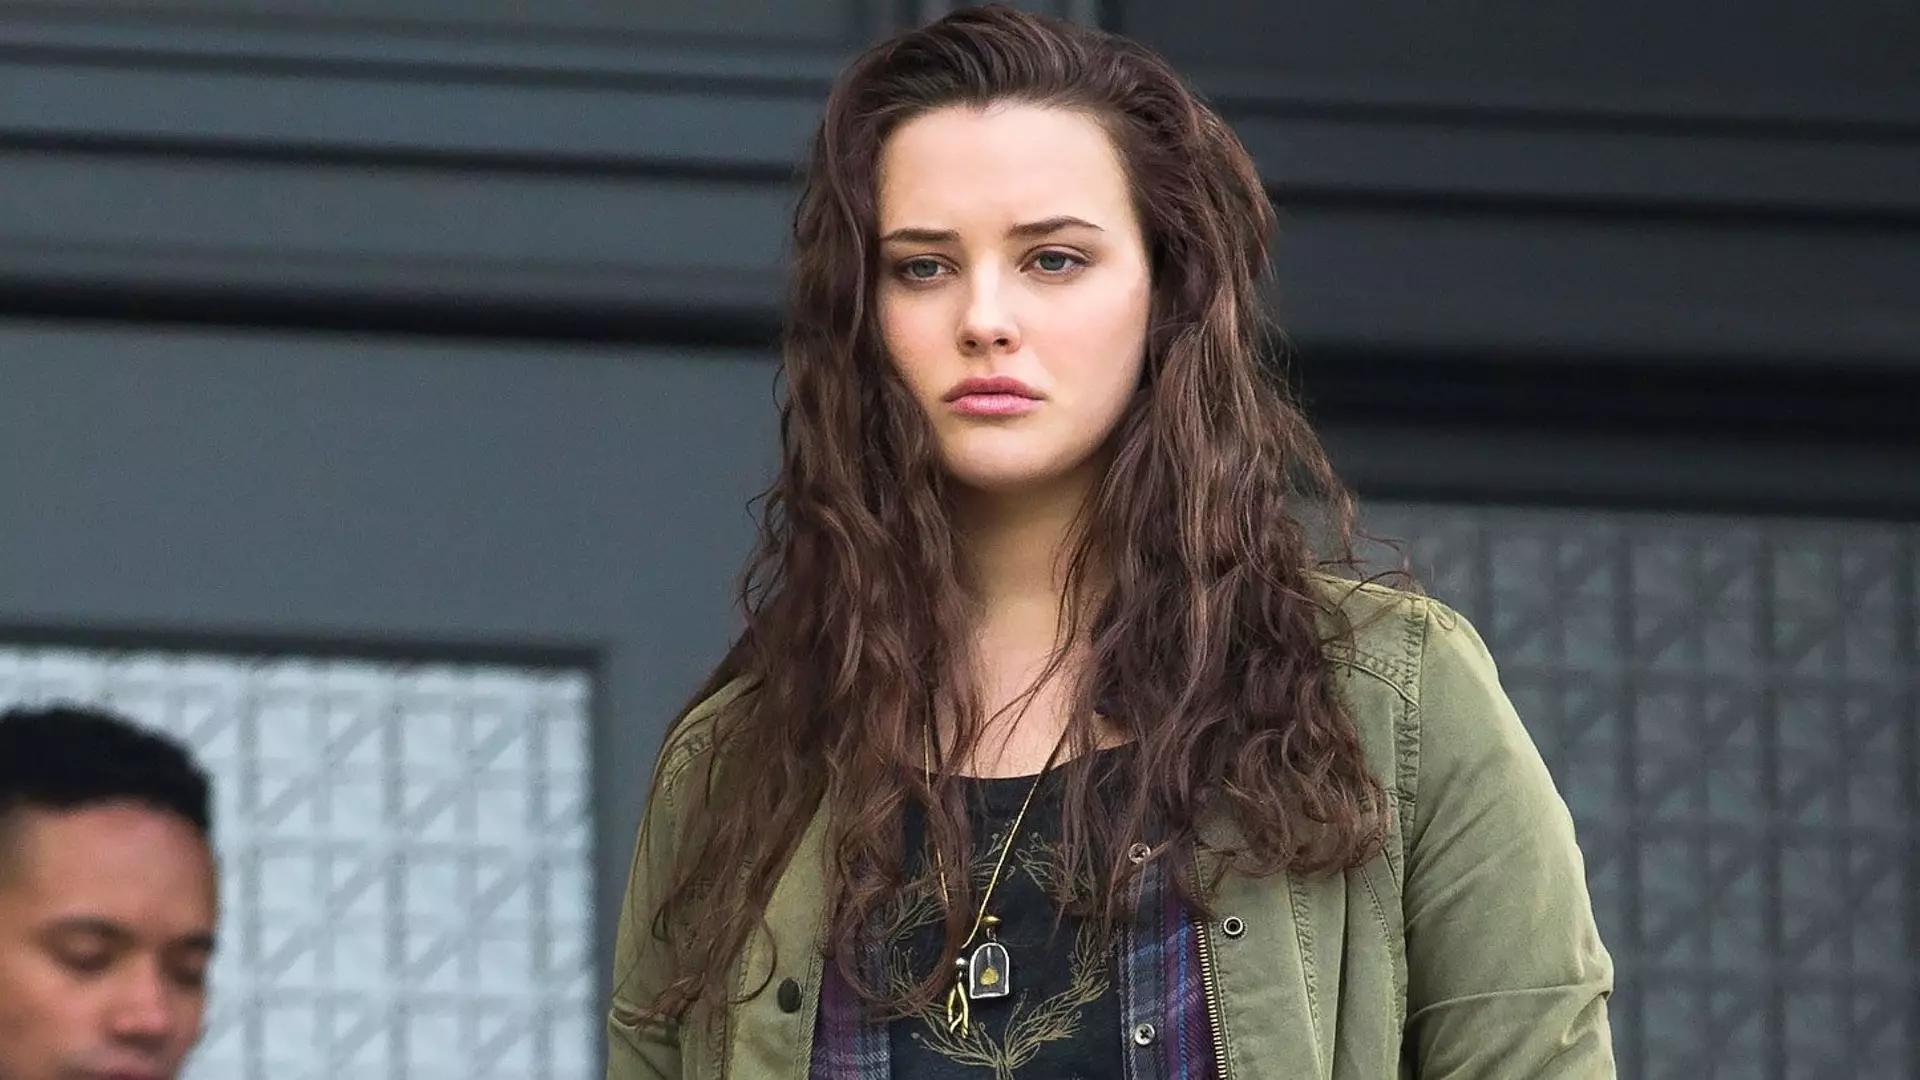 '13 Reasons Why' explored themes of identity, psychological pain and teen bullying (